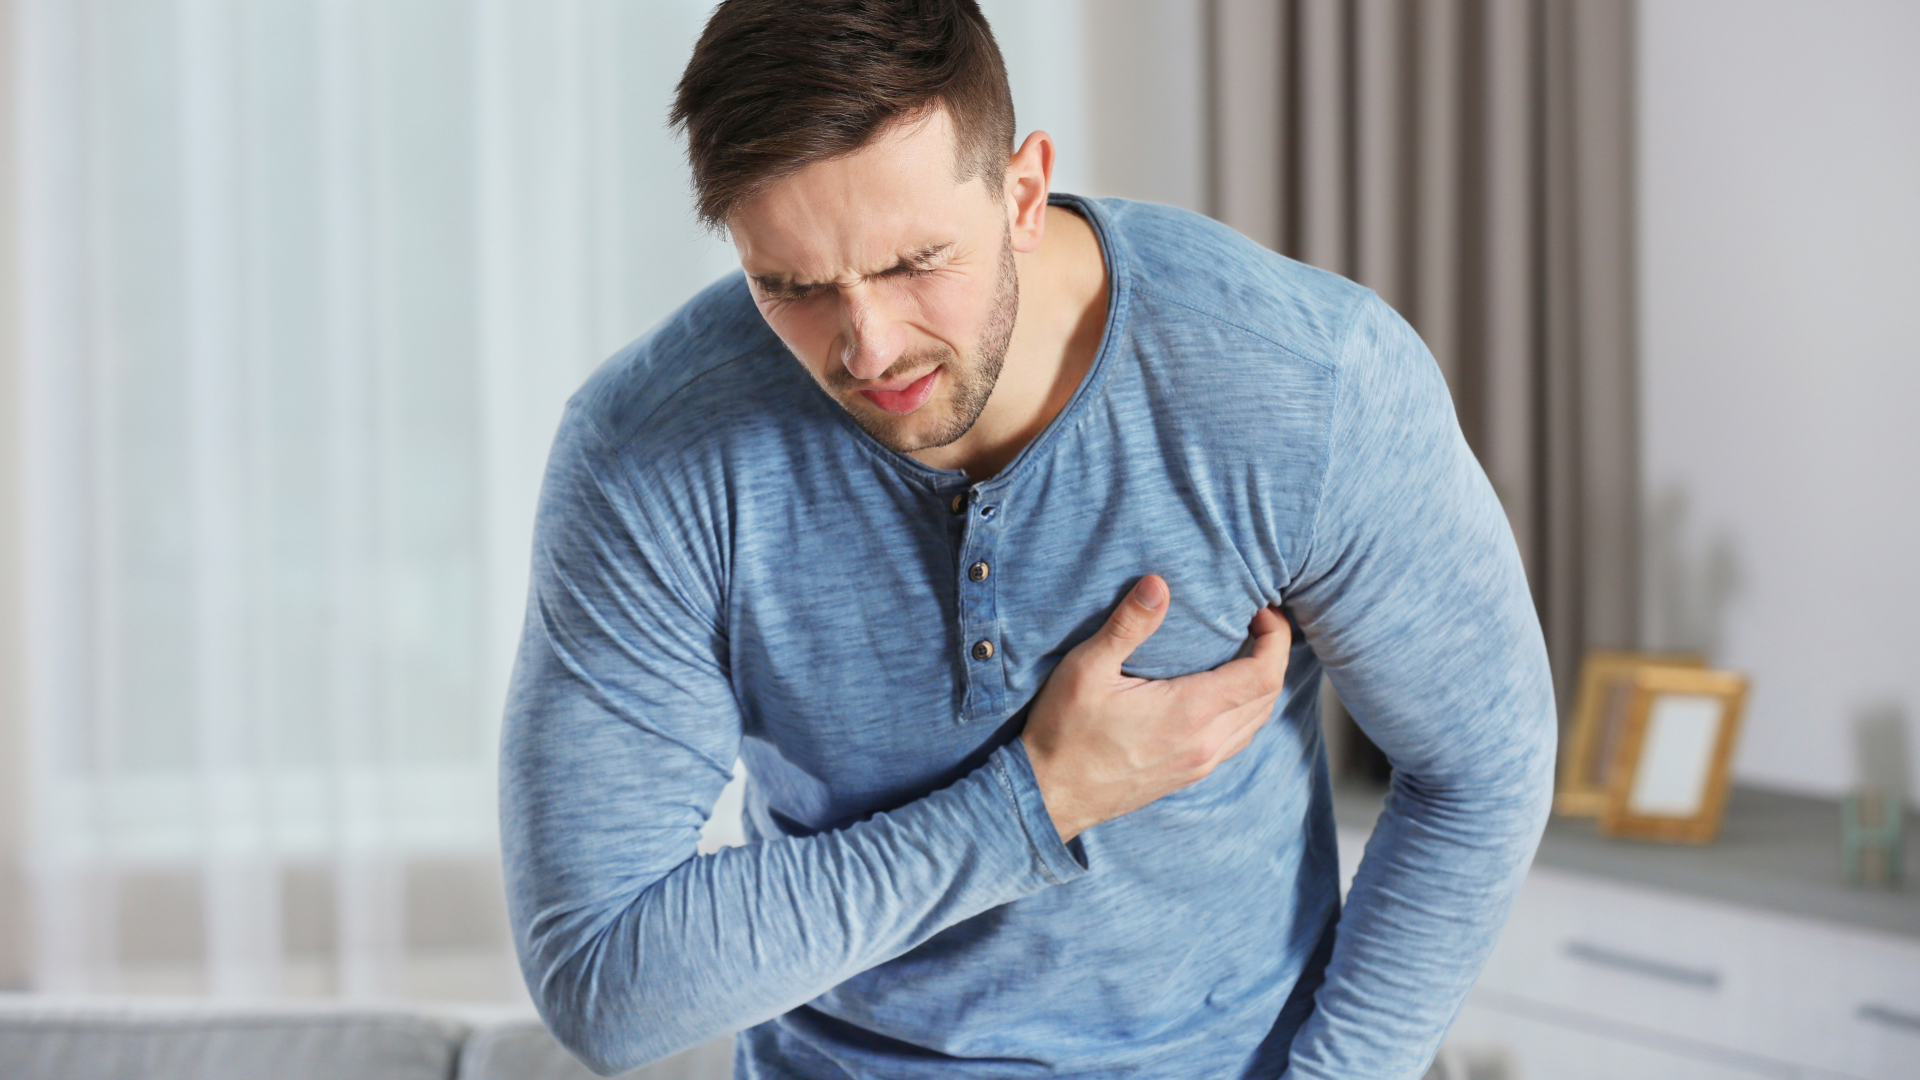 Can Energy Drinks Cause a Heart Attack?